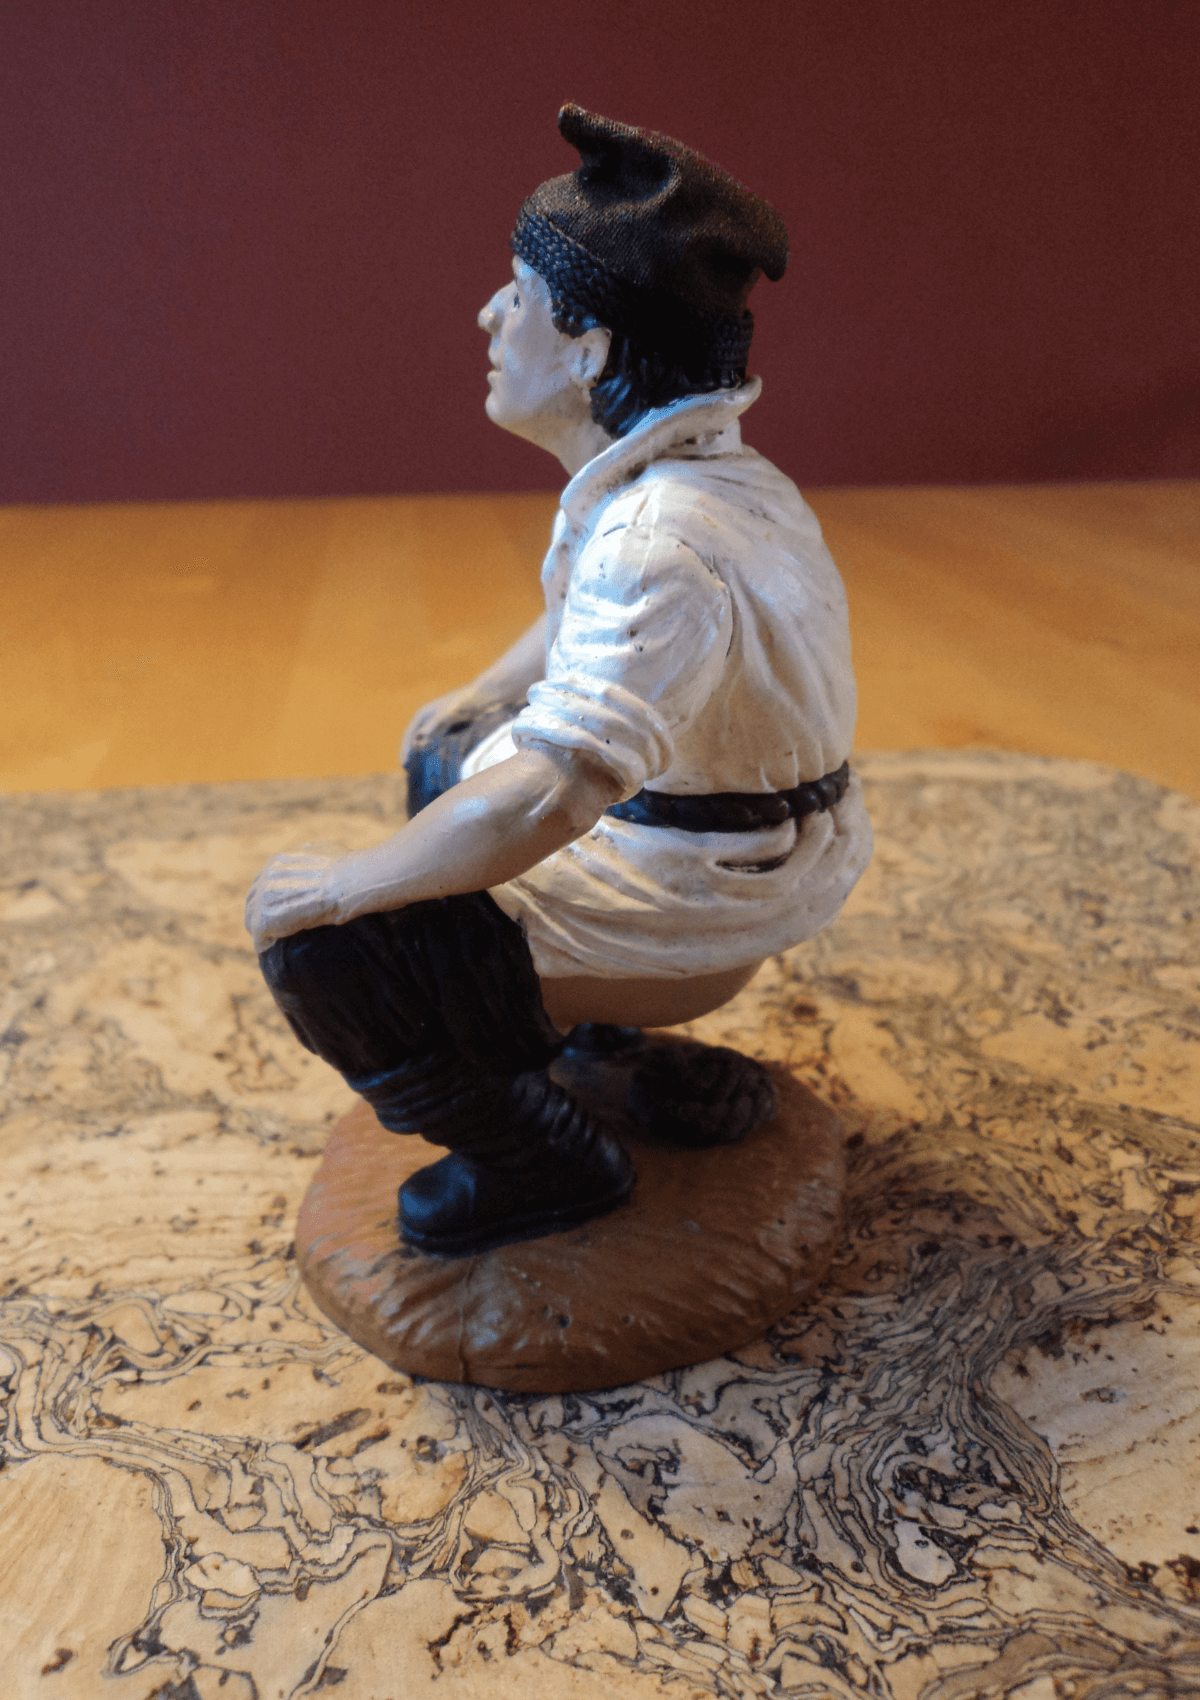 Caganer figures, typical in Barcelona, are designed to look like people squatting to defecate.